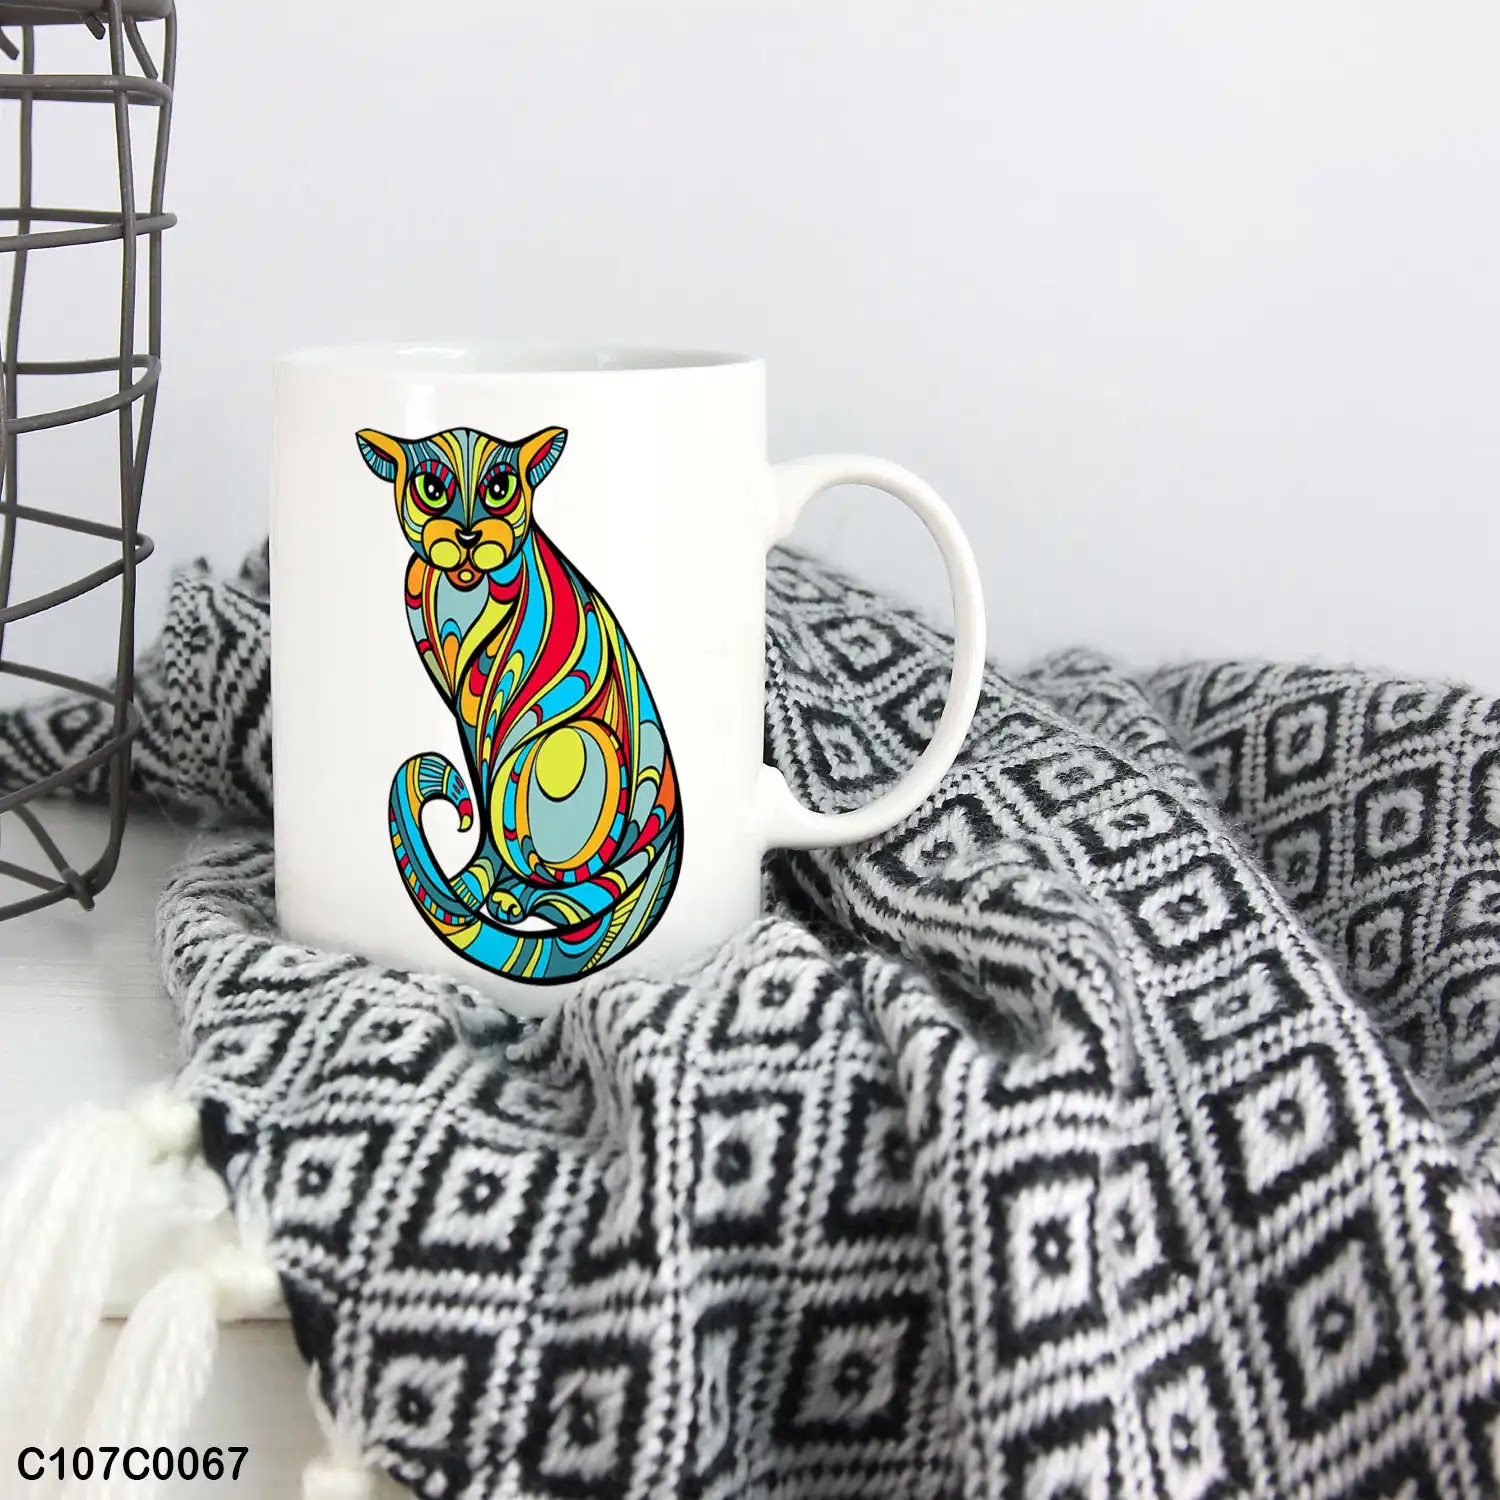 A mug (cup) printed with an image of a colored tiger